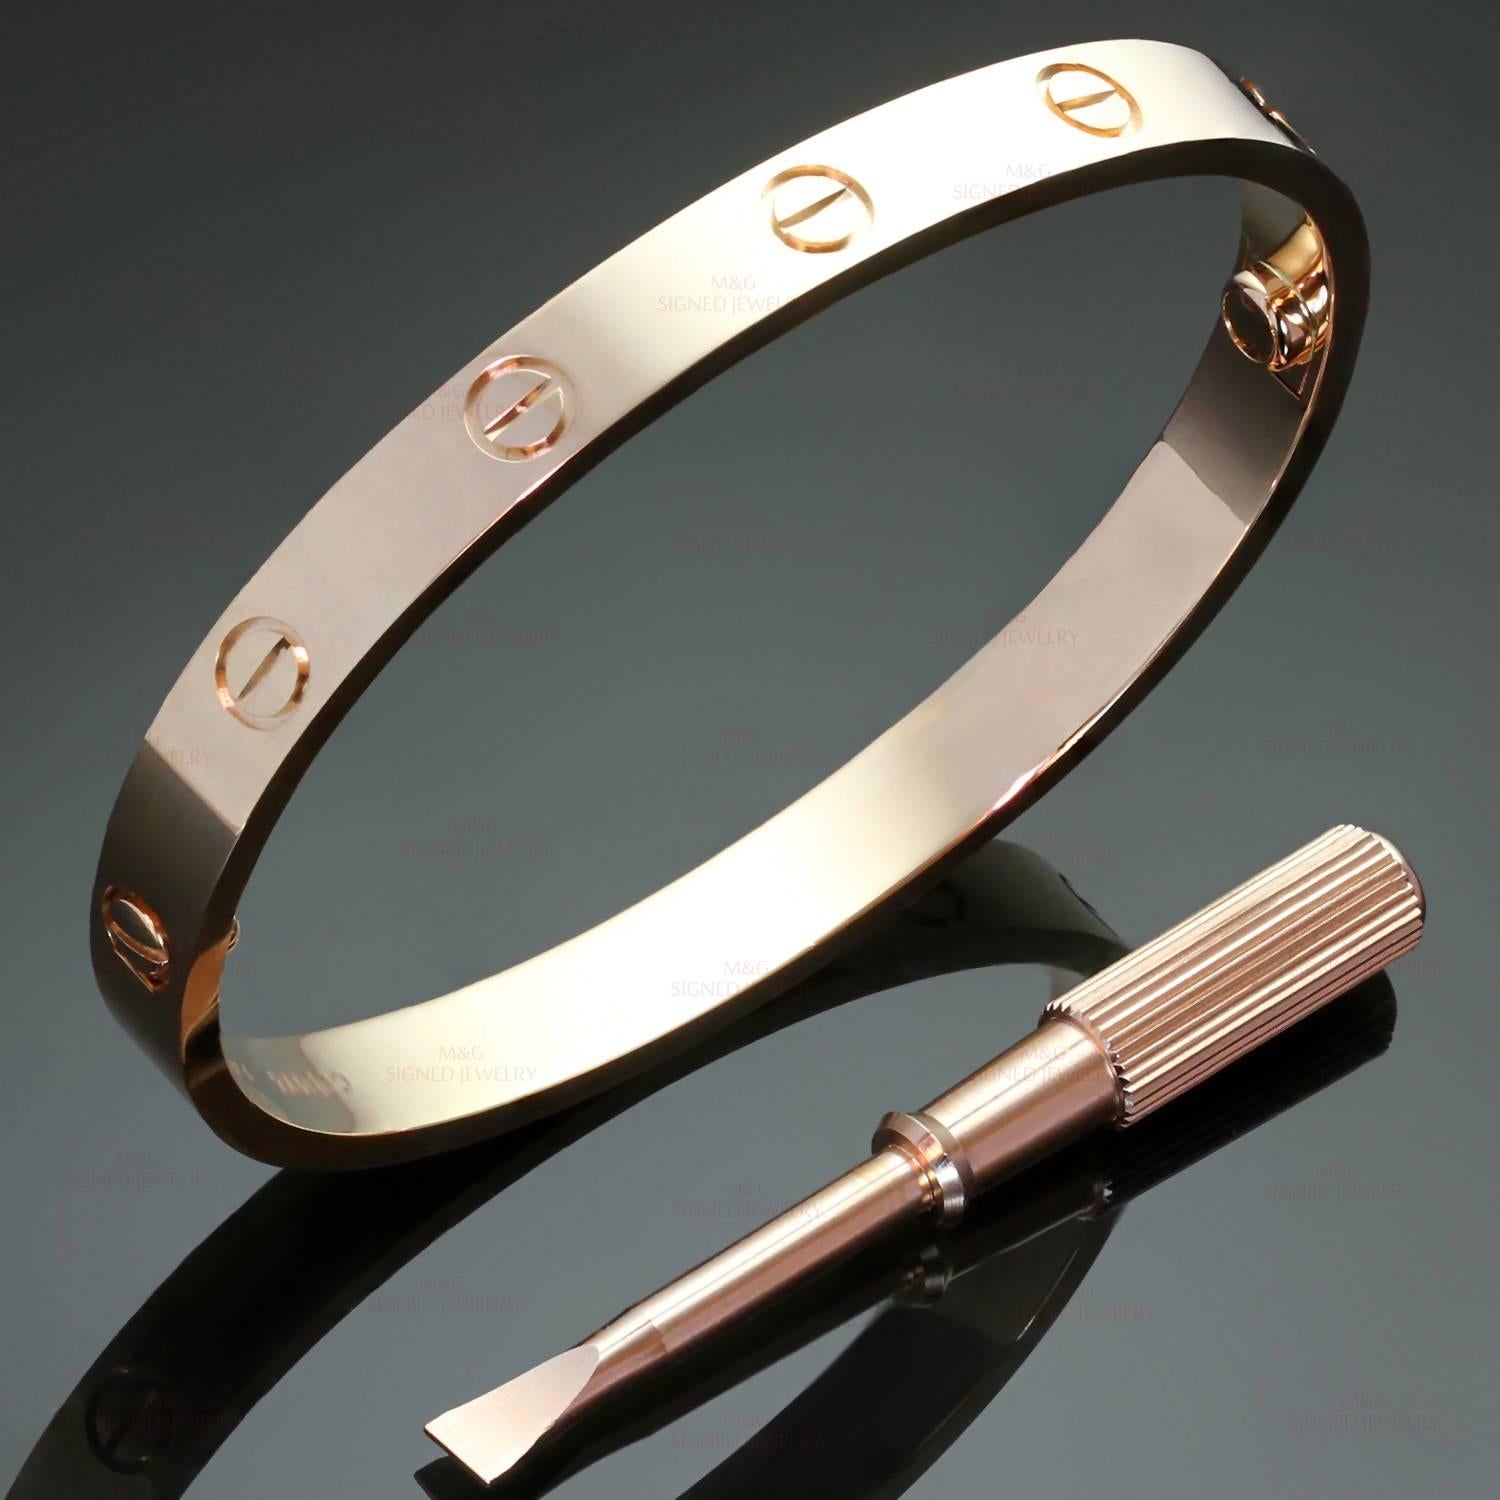 This classic Cartier bracelet from the iconic Love collection is made in 18k rose gold and completed with a screwdriver and box. This is the new style of the bangle in size 17. Made in France circa 2010. Measurements: 6.75" (17.1cm) length. 